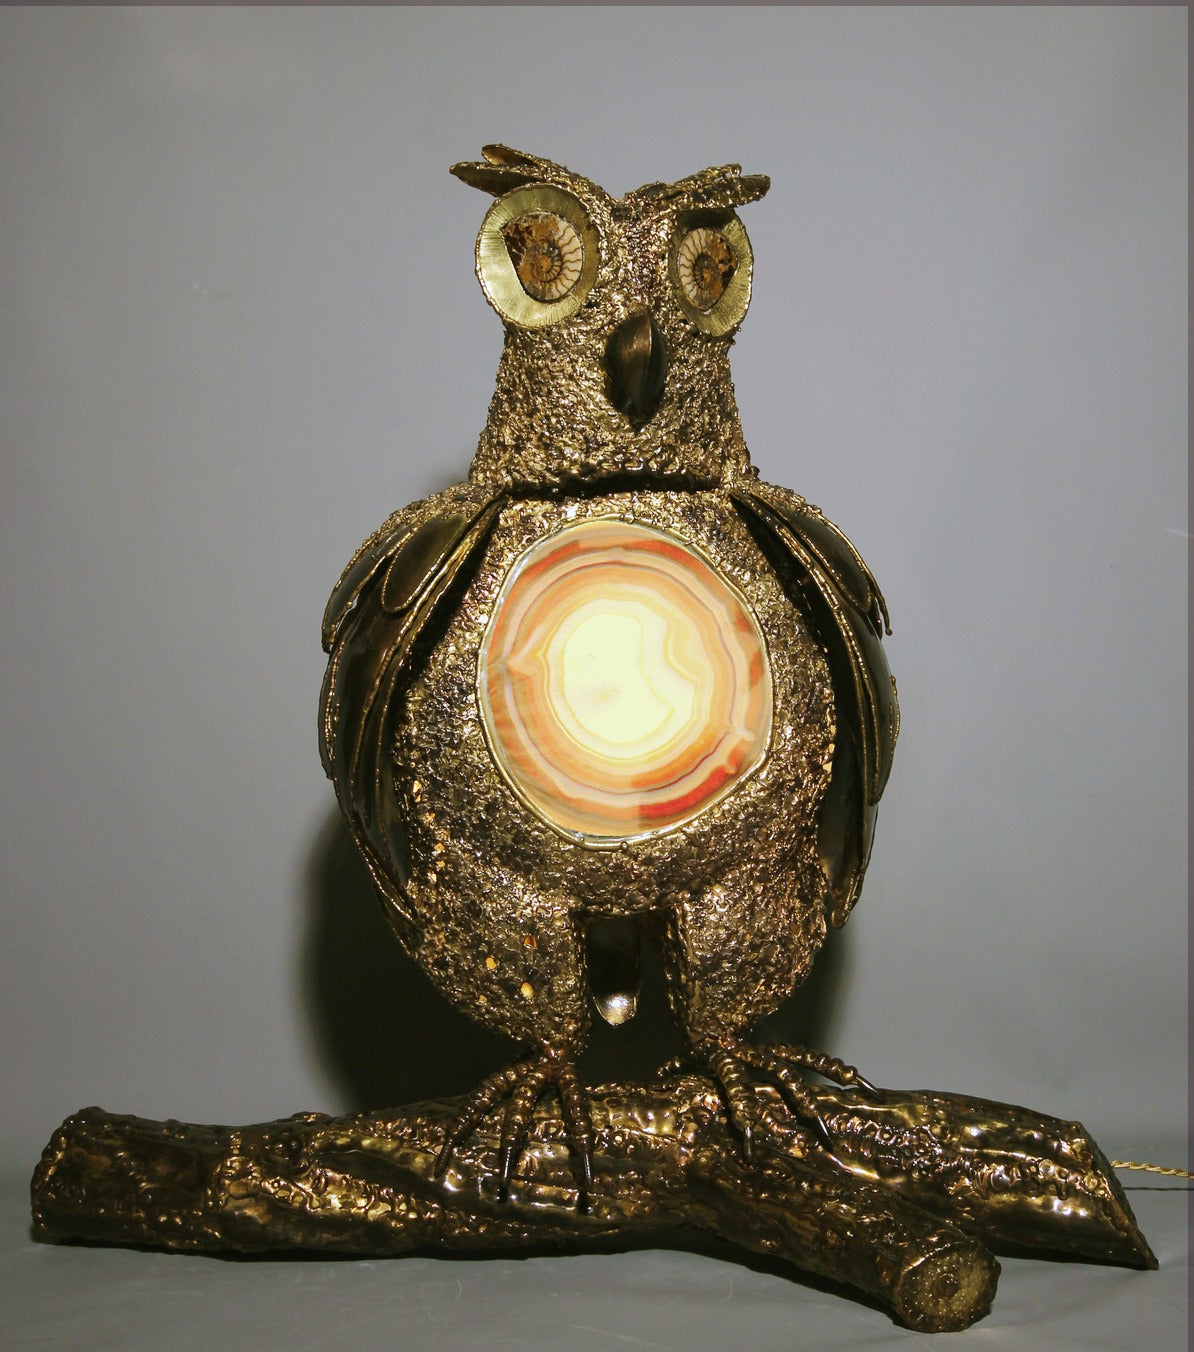 Spectacular luminous sculpture by Richard Faure in worked brass.
The abdomen is made from a slice of agate concealing the lighting, the eyes are two fossil ammonites. Unique piece. Signed.